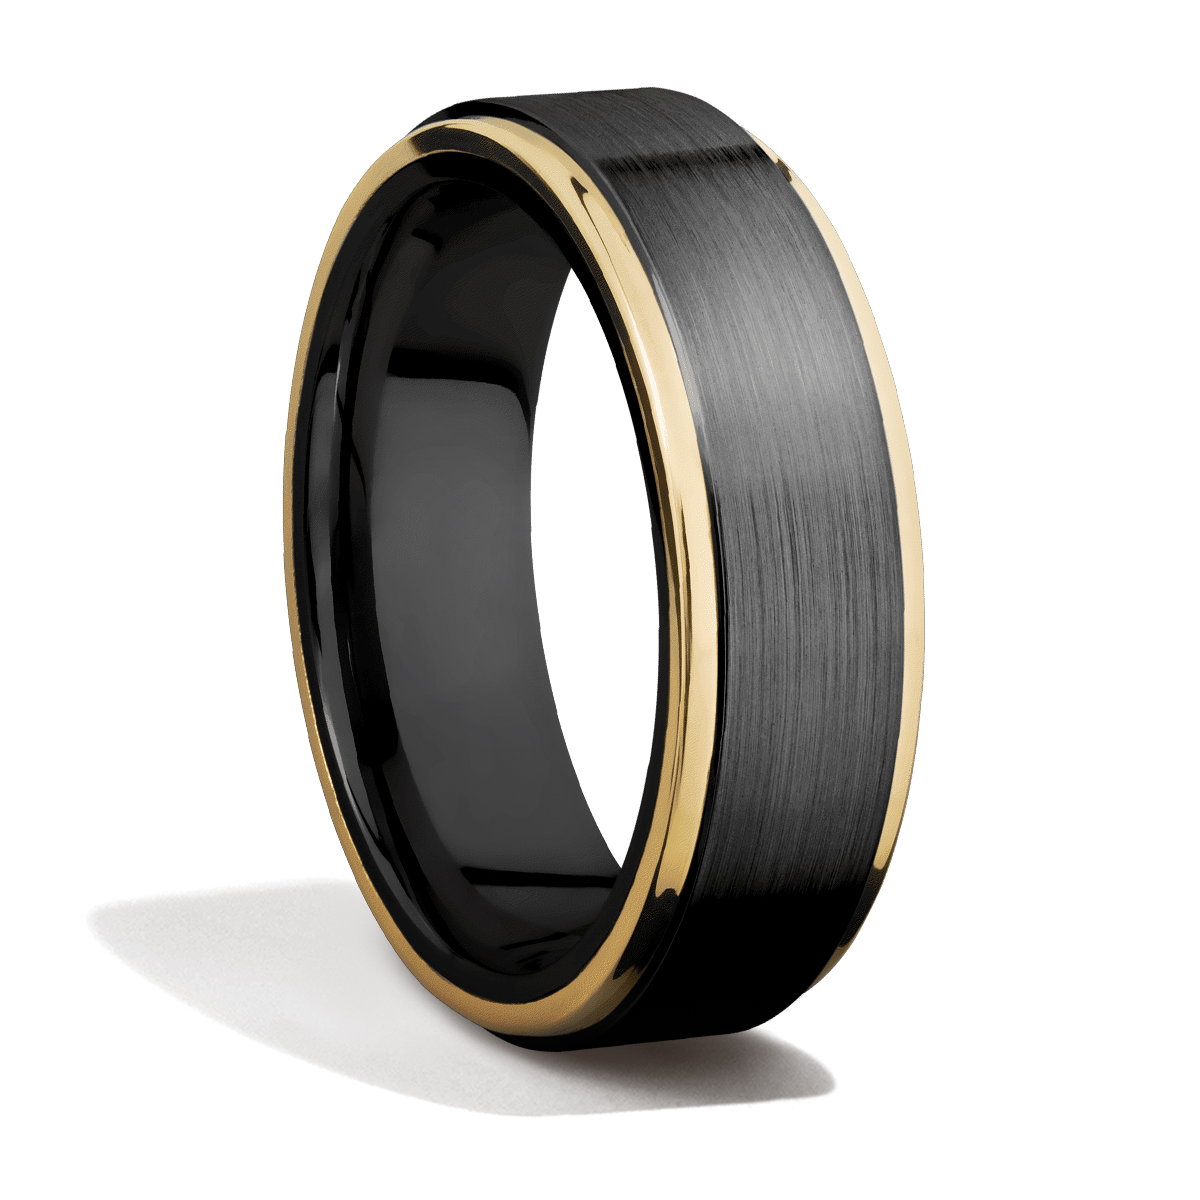 Gamer Rings, Playstation Ring, Playstation Jewelry, Couple Ring Set, Player  1 Player 2 Rings, Controller Rings, Black Gamer Wedding Rings, Black  Tungsten Gamer Wedding Bands, Black Tungsten Rings, Black Wedding Bands,  Gamer Jewelry